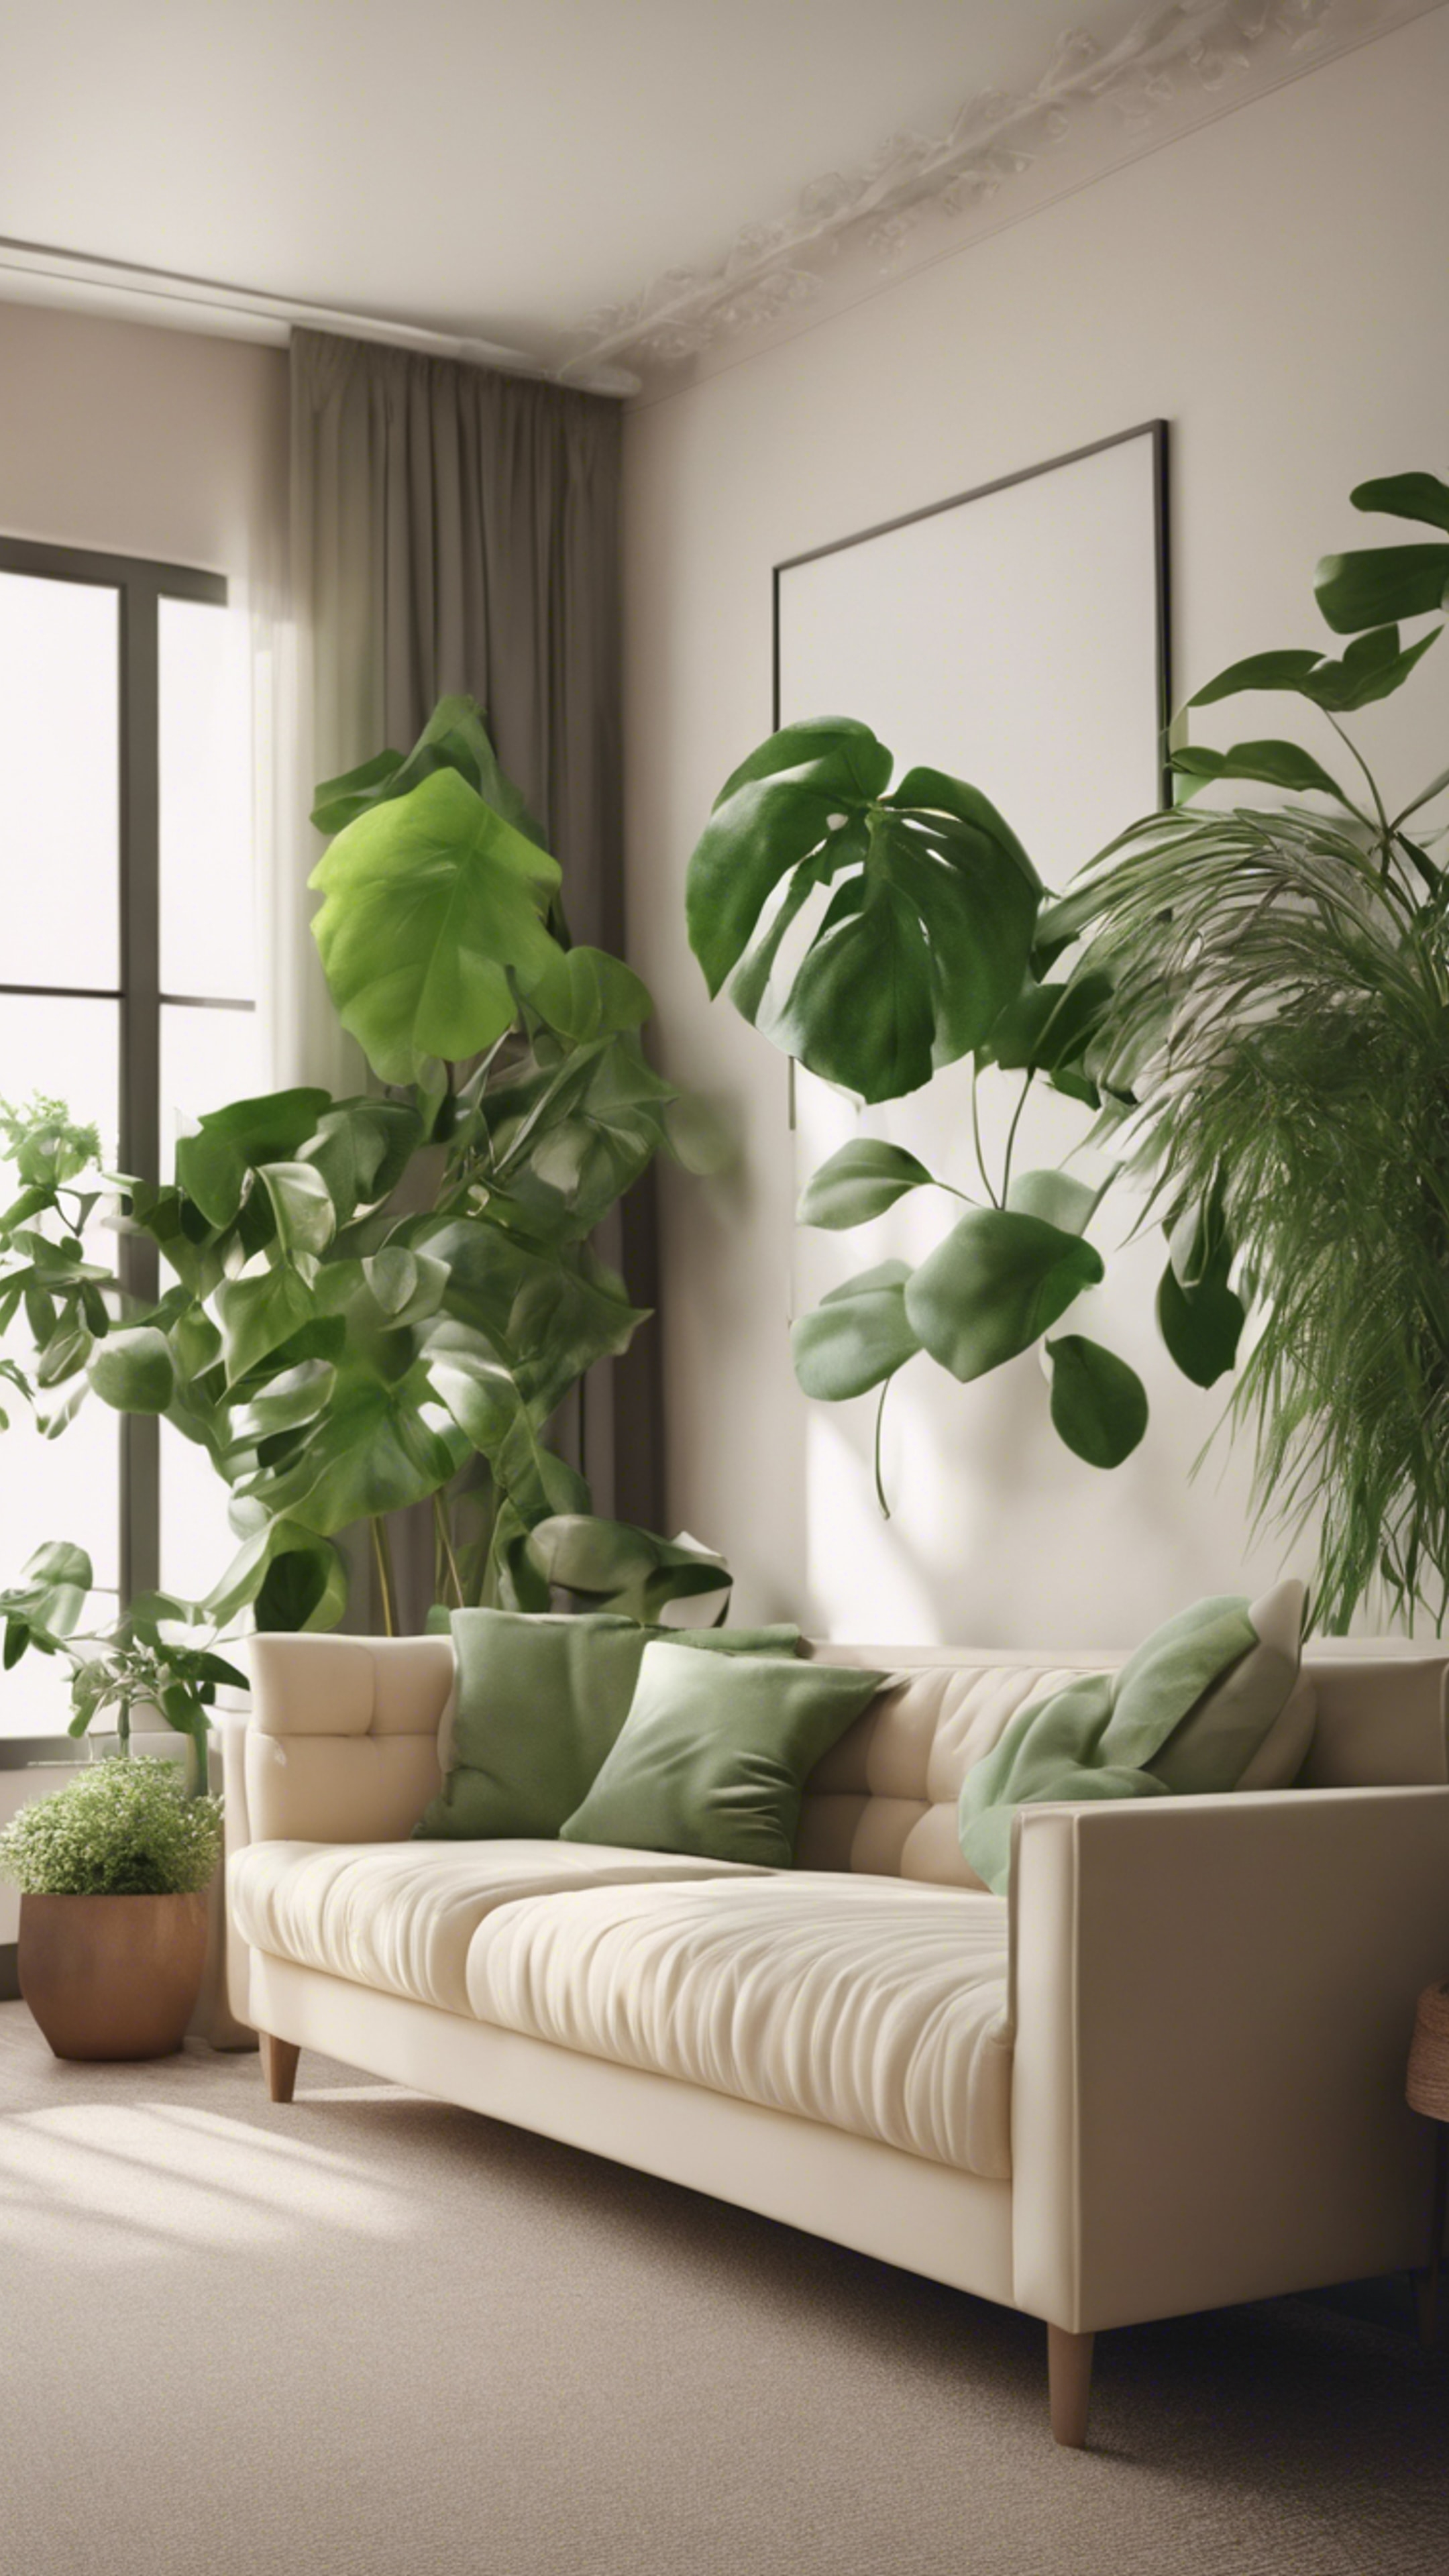 A simplistic living room featuring a cream couch contrasted with a natural green aesthetic of indoor plants Sfondo[57c4f329650745189cc4]